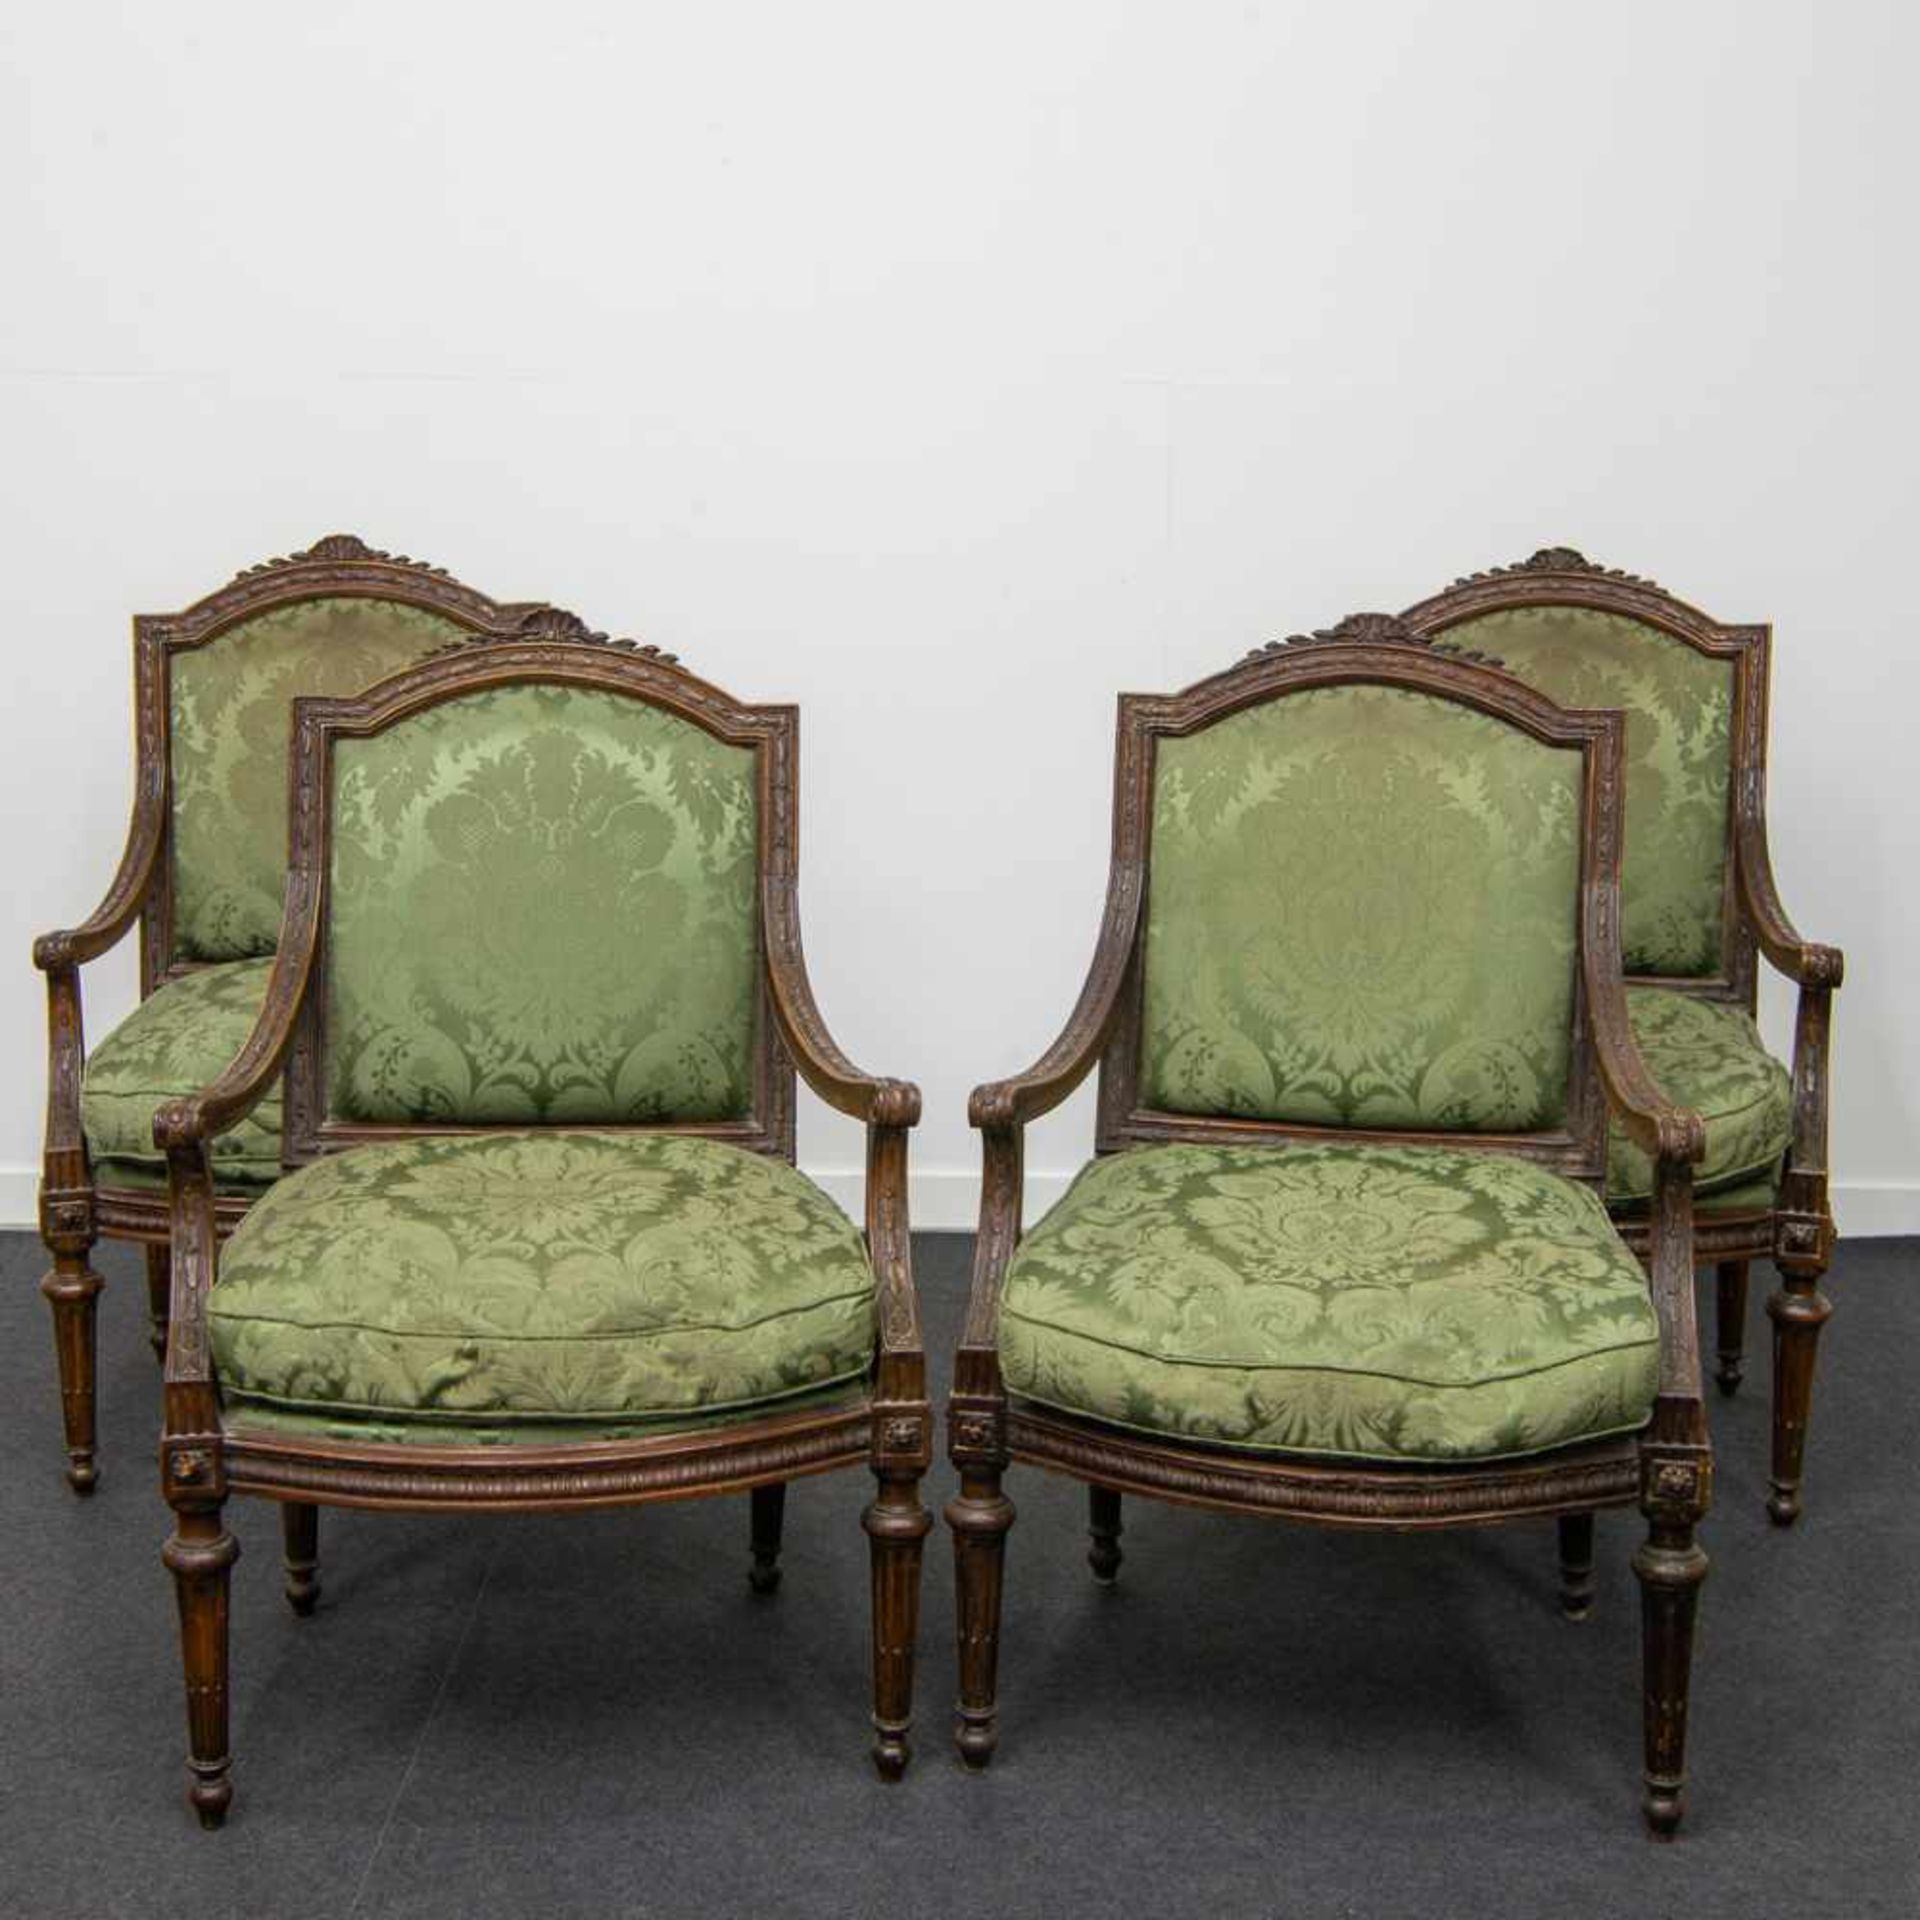 4 LXVI period armchairs - Image 18 of 20